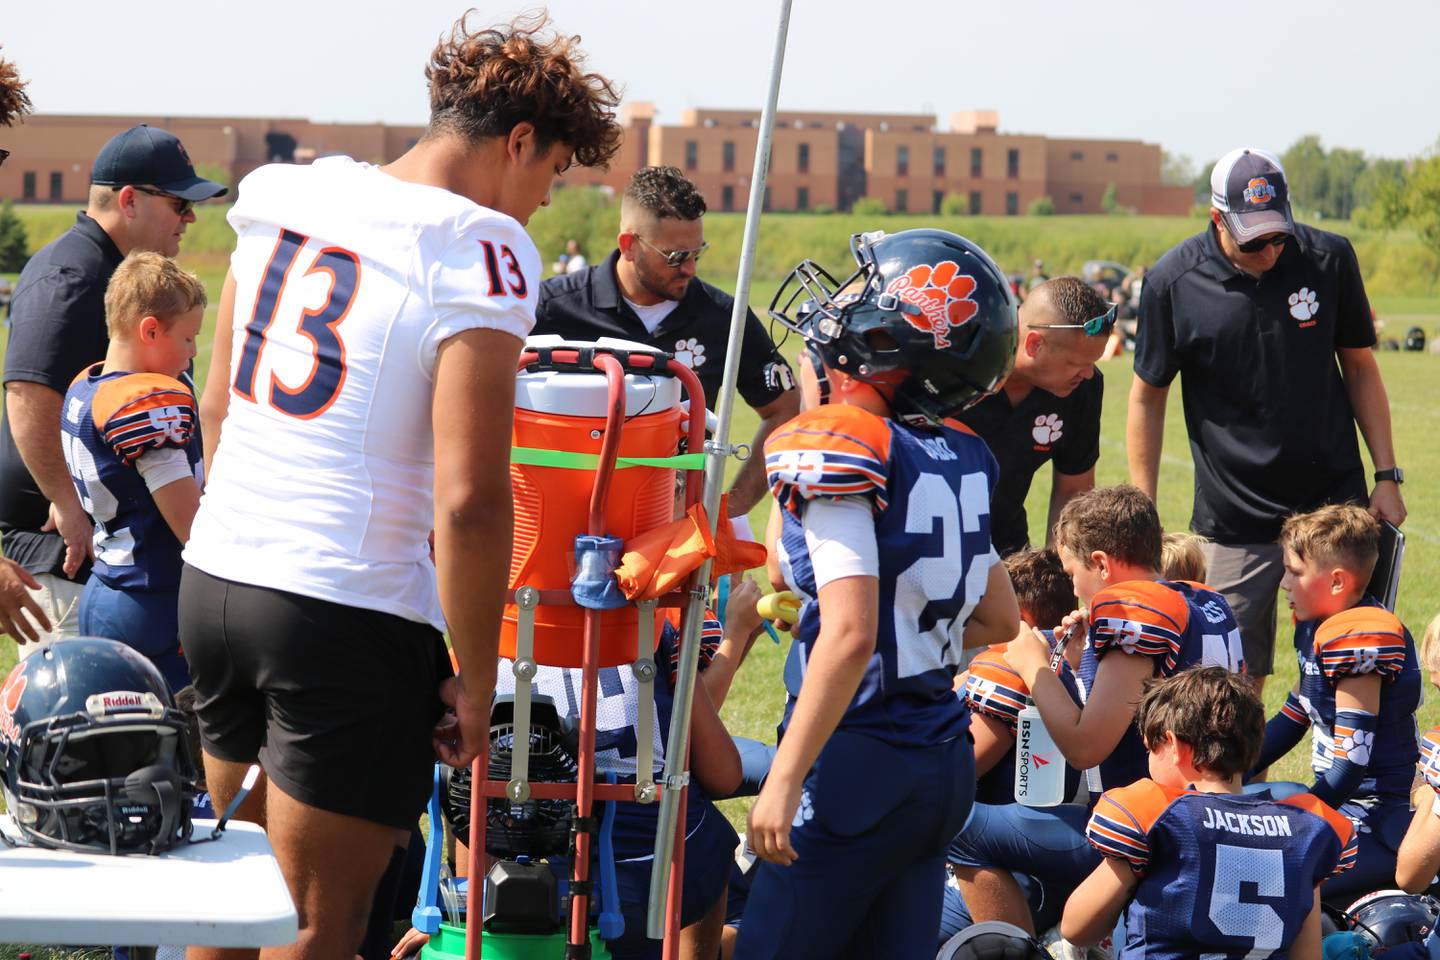 Players from the Oswego High School varsity football team attended an Oswego Youth Tackle Football game to support and encourage a 9U team on Sept. 17 2022.